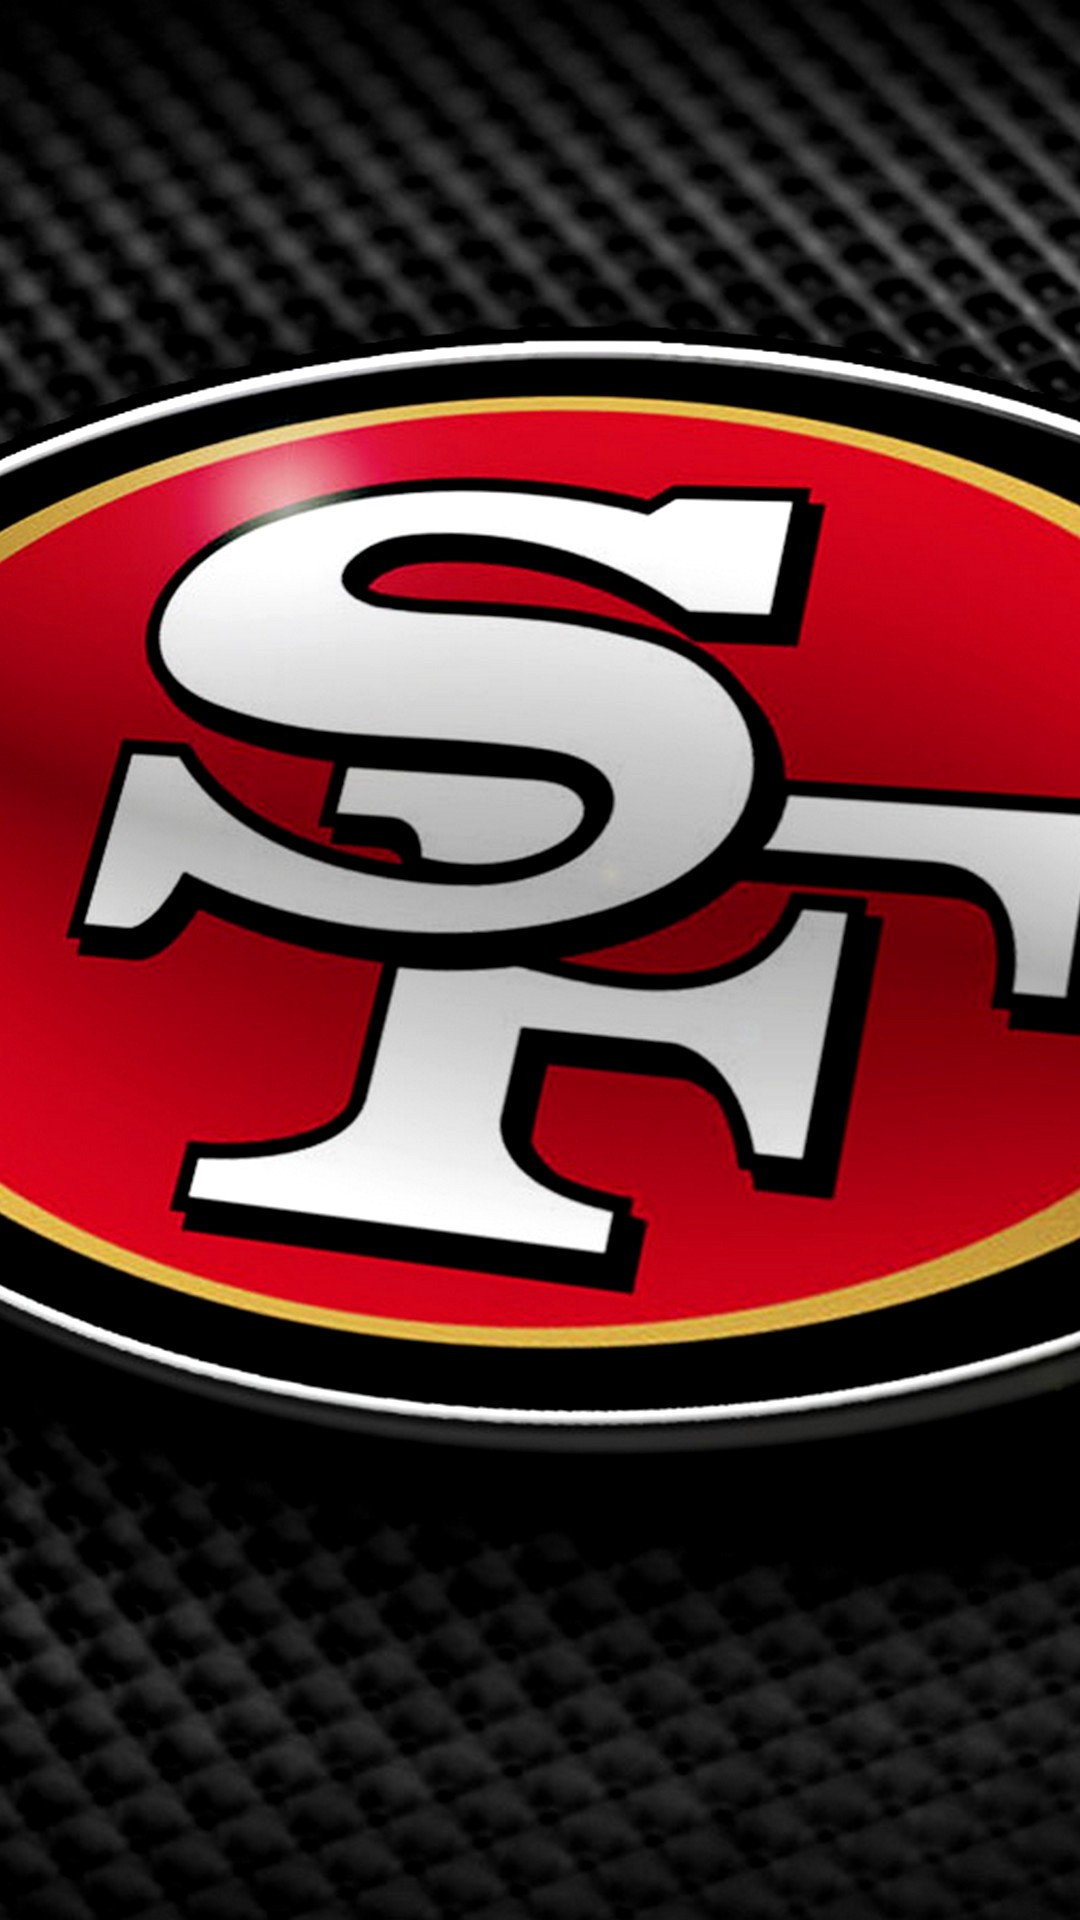 San Francisco 49ers Wallpaper For Mobile with high-resolution 1080x1920 pixel. You can use and set as wallpaper for Notebook Screensavers, Mac Wallpapers, Mobile Home Screen, iPhone or Android Phones Lock Screen